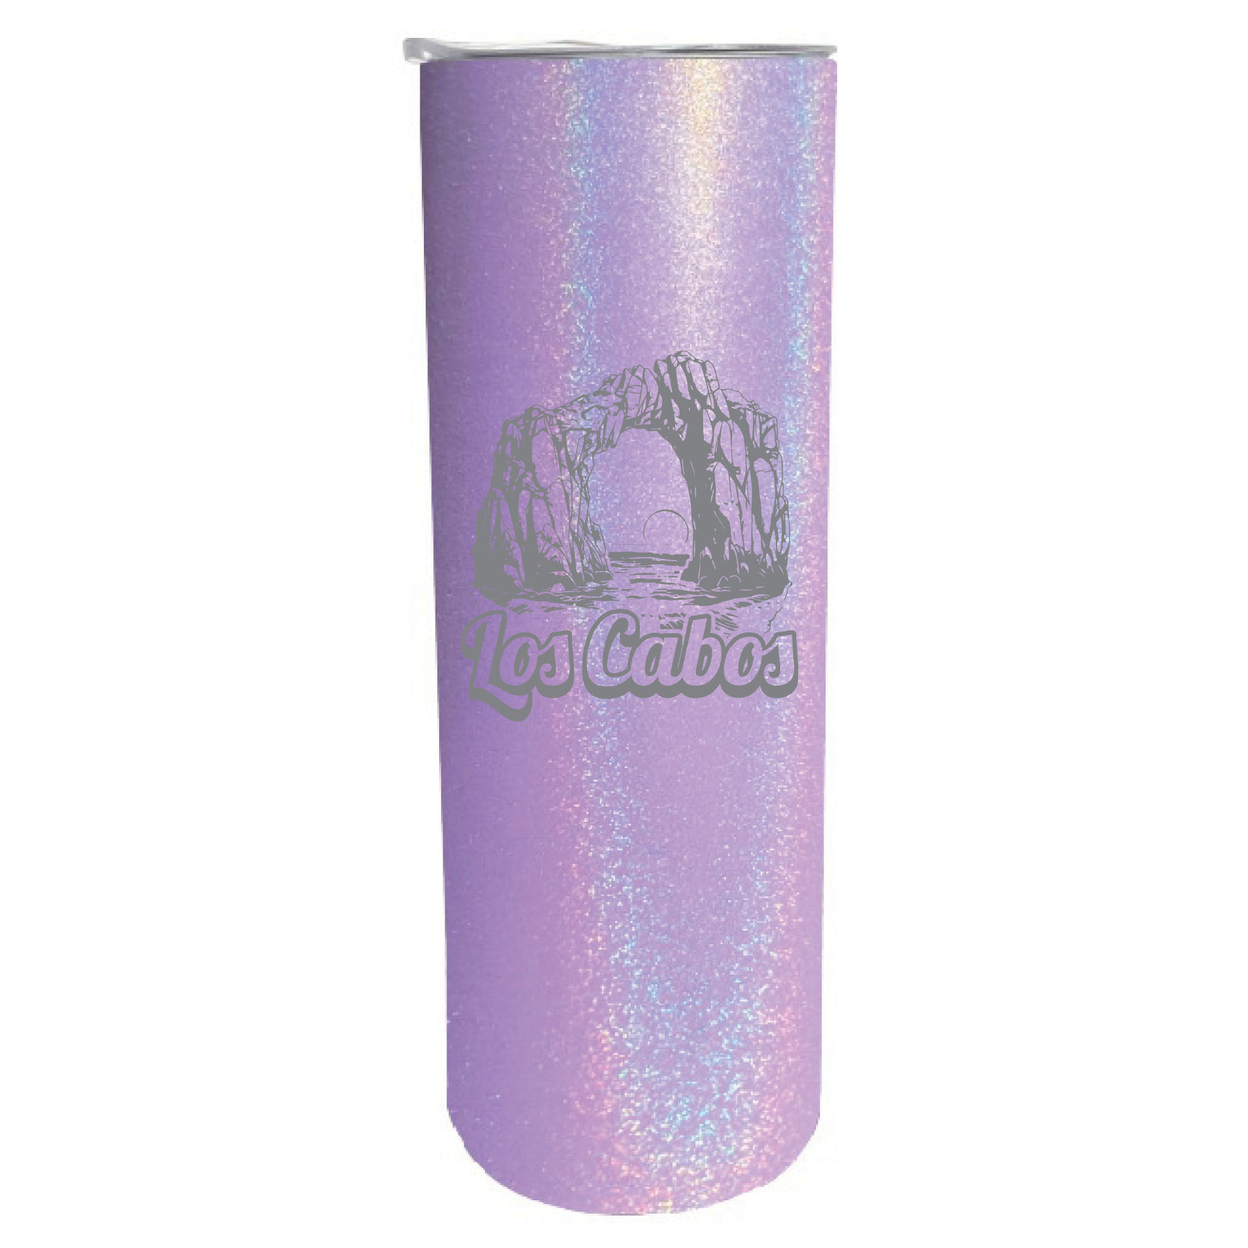 Los Cabos Mexico Souvenir 20 Oz Engraved Insulated Stainless Steel Skinny Tumbler - Navy,,2-Pack